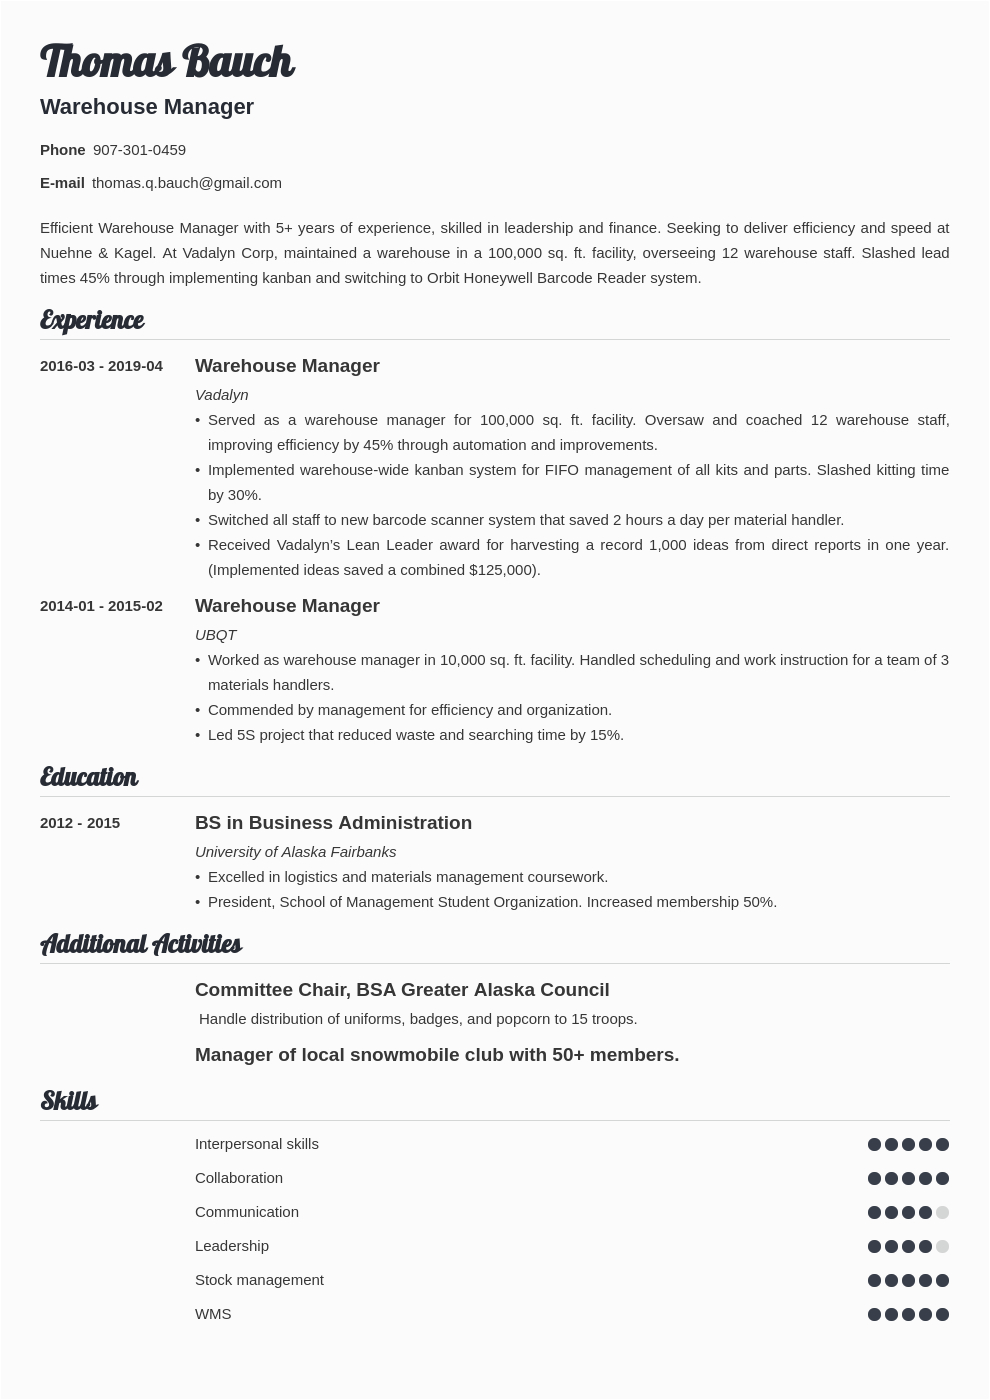 Sample Resume for Warehouse Manager In India Warehouse Manager Resume Sample [ Job Description]